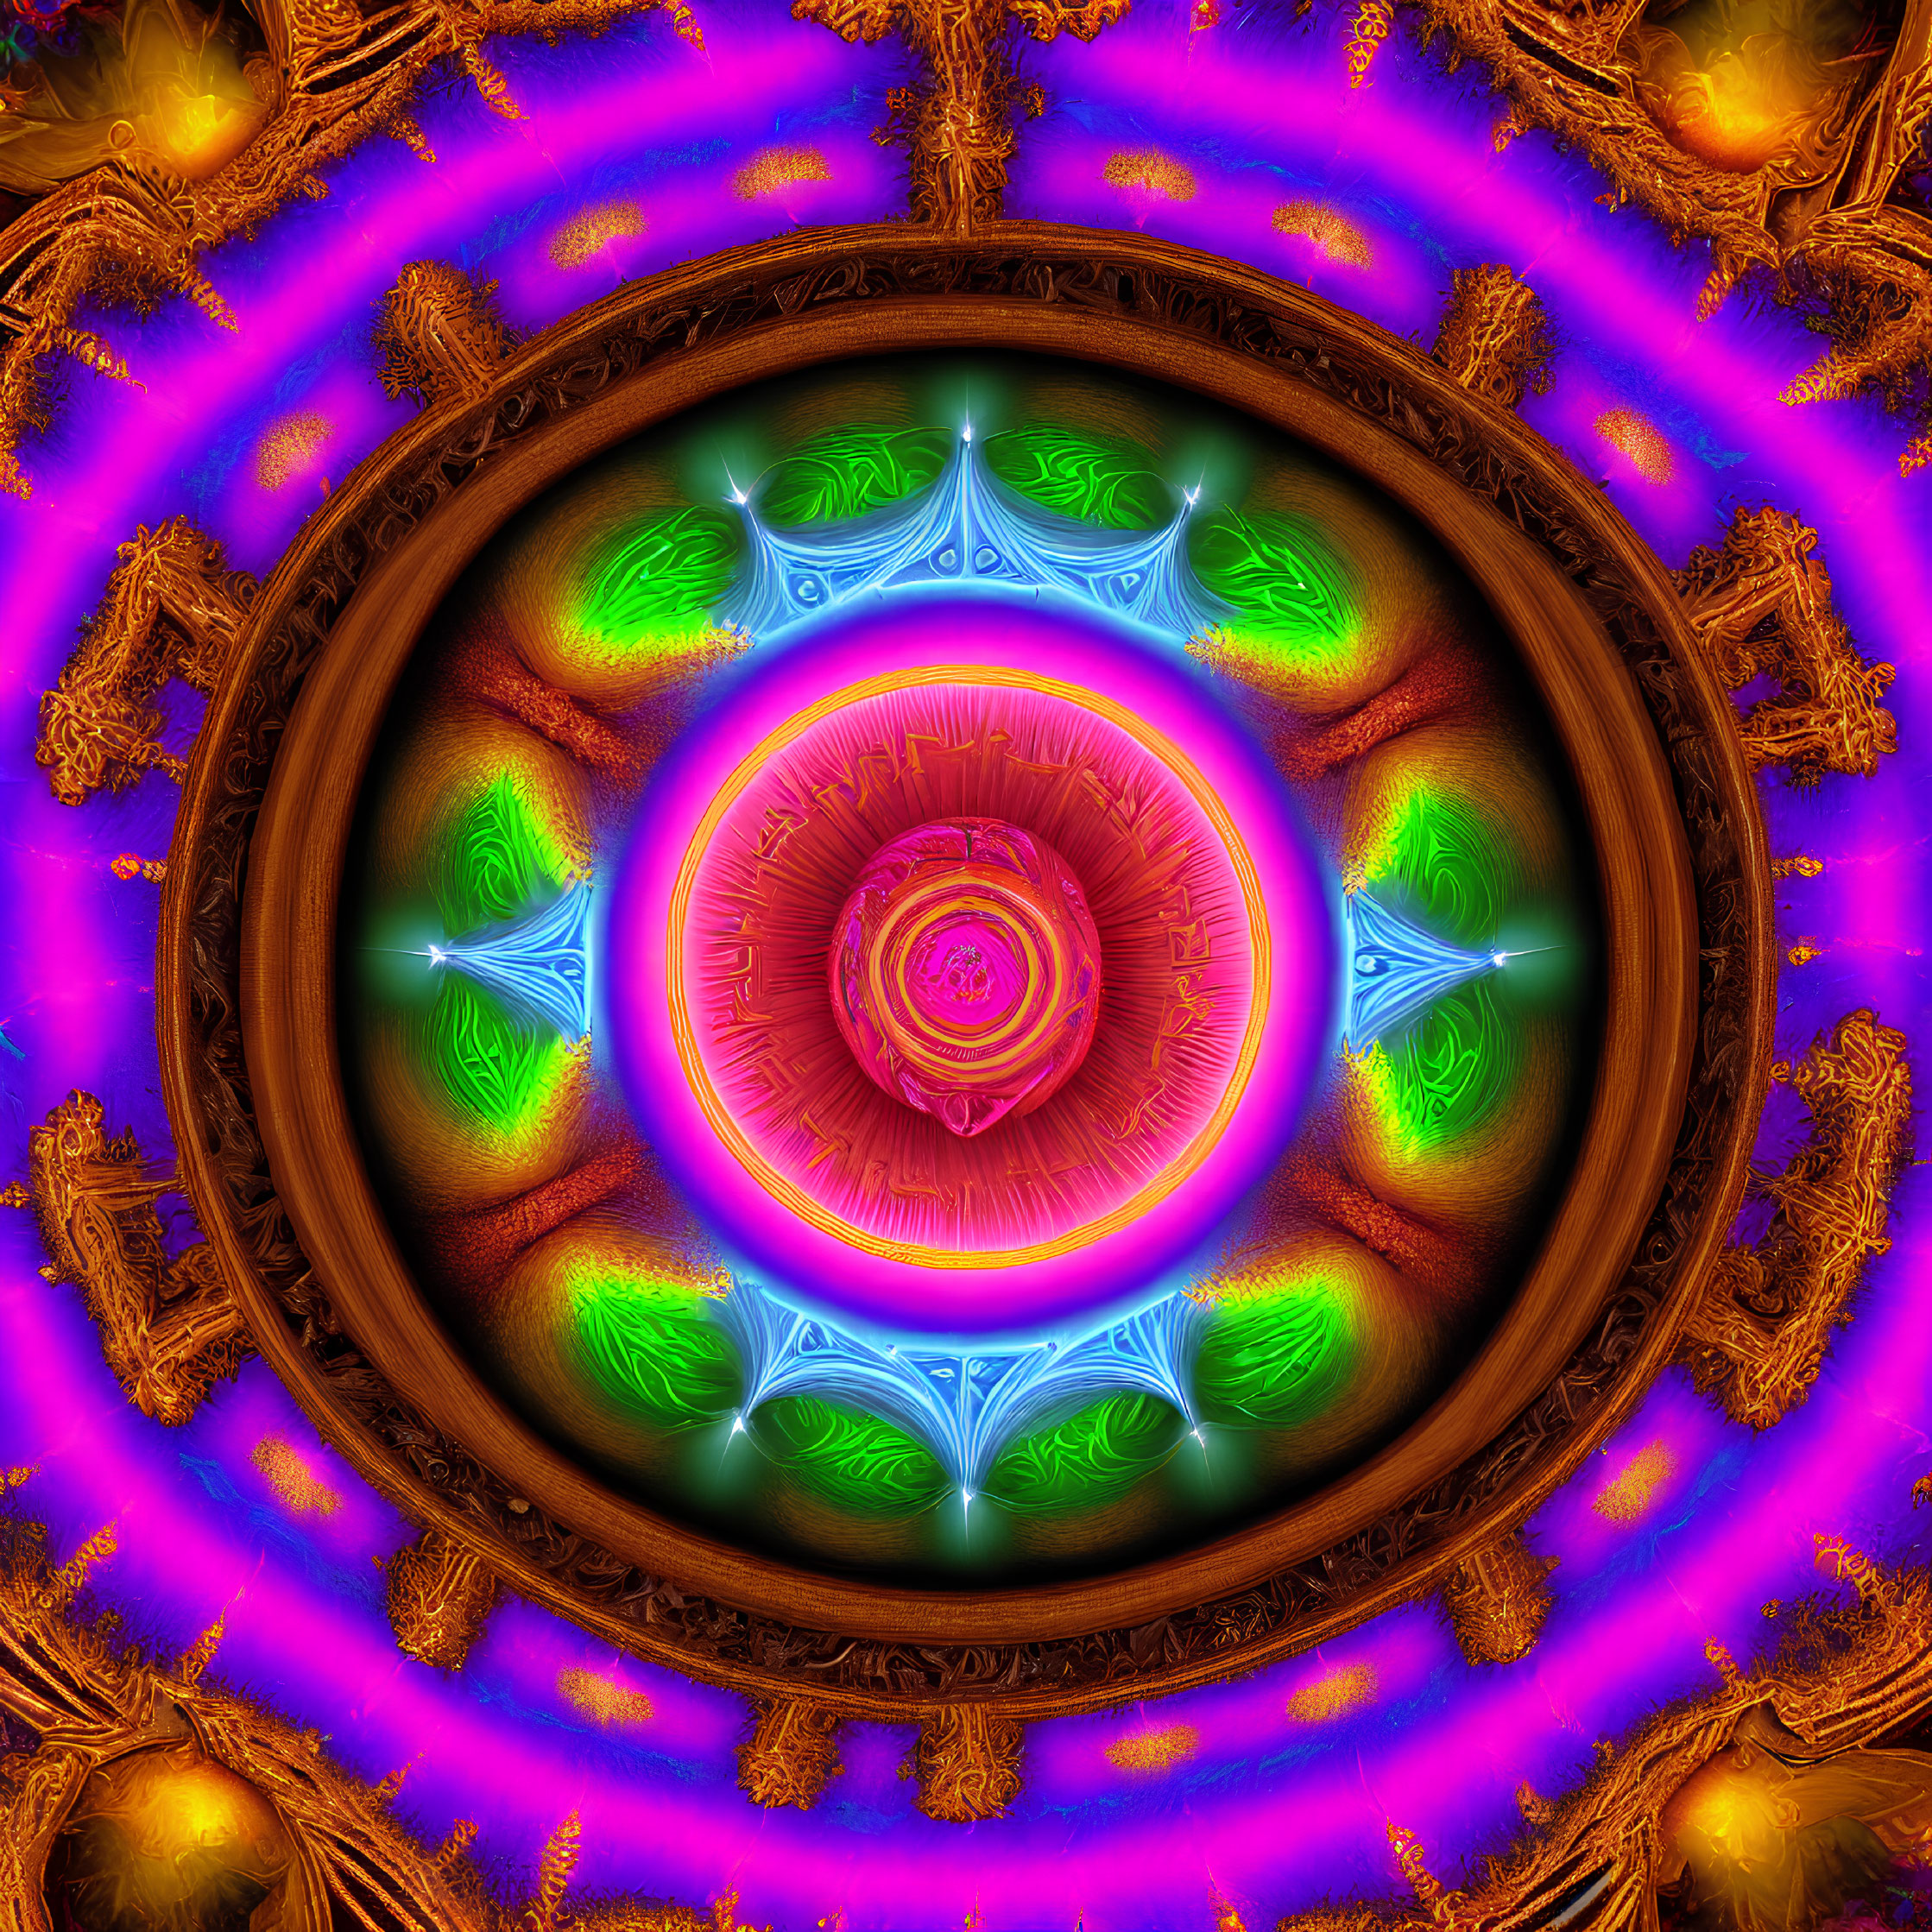 Symmetrical Blue, Green, and Orange Fractal Art with Glowing Center